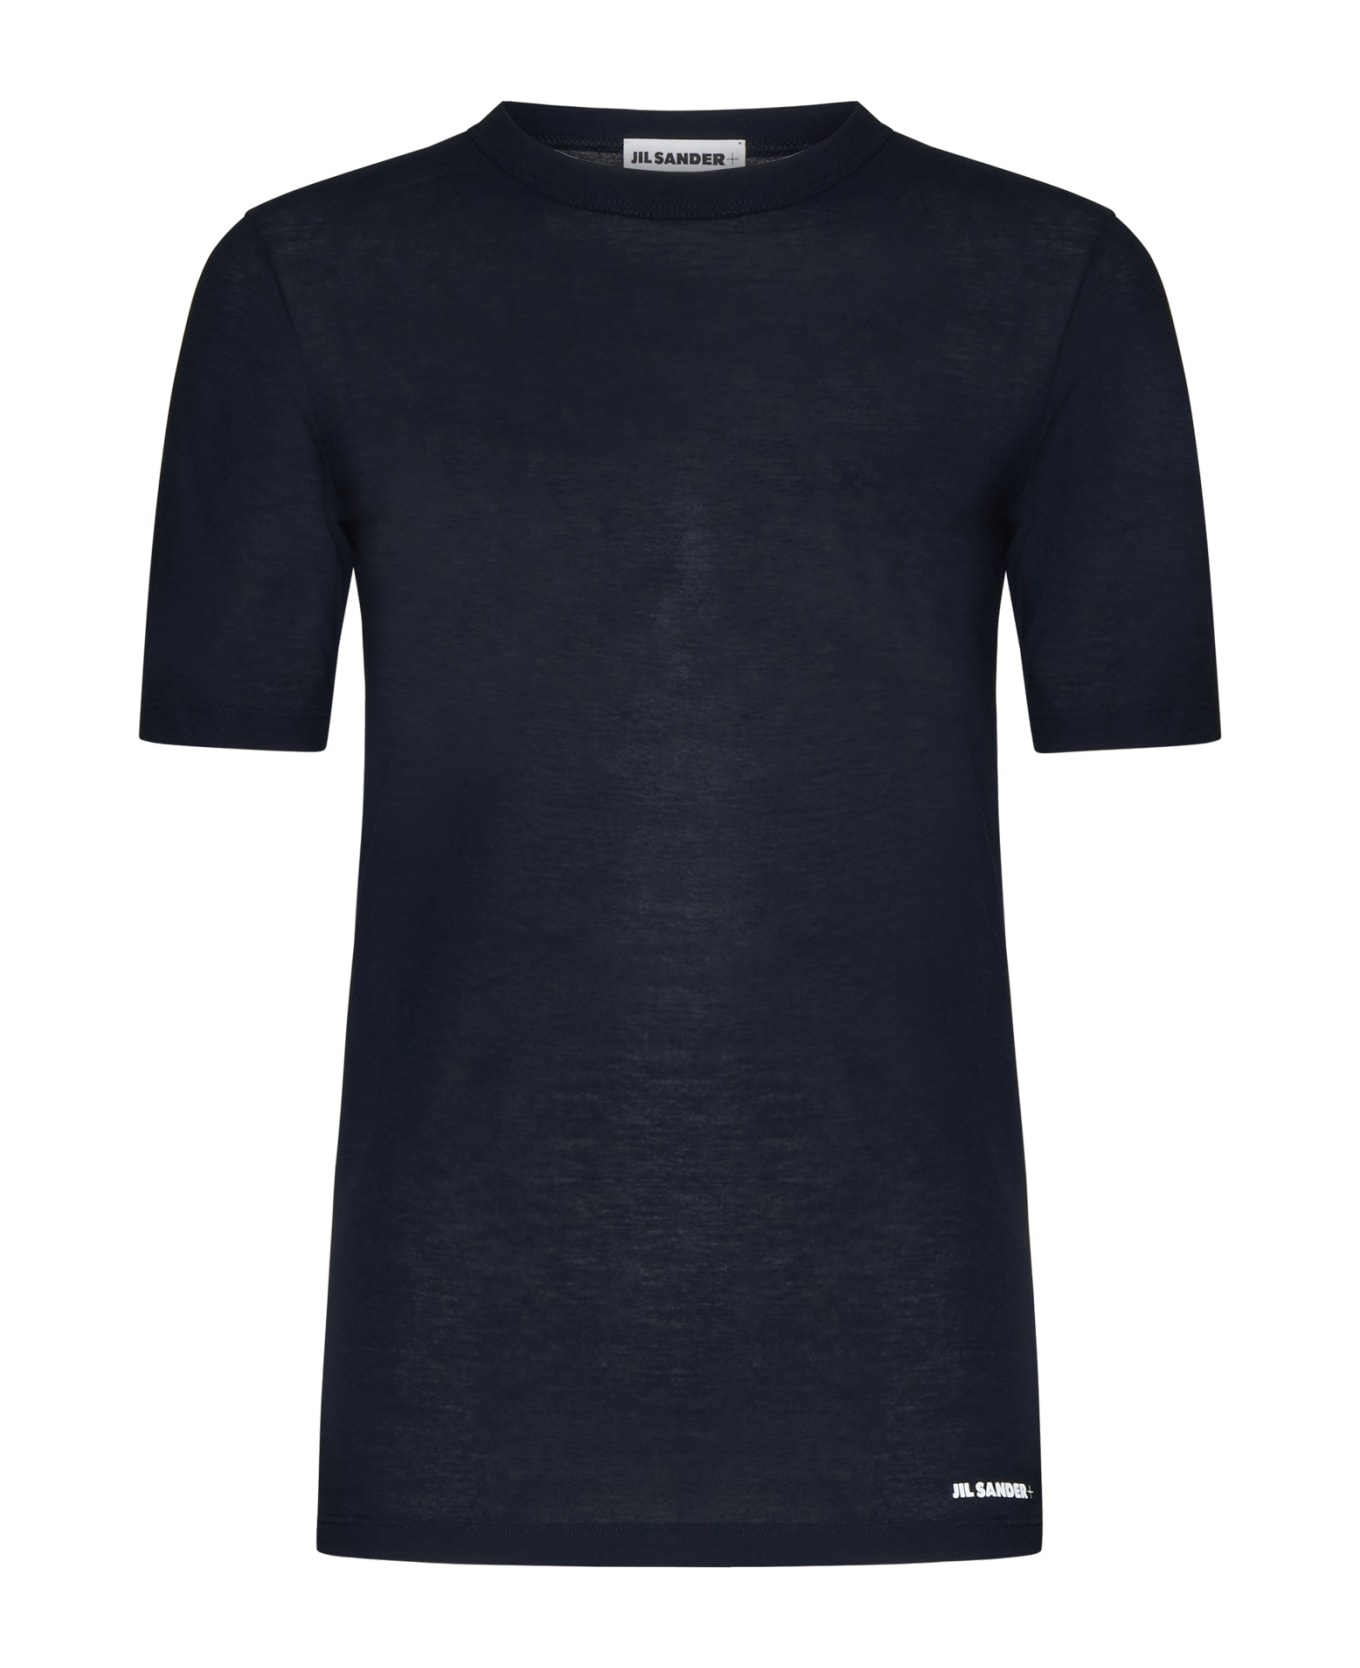 Jil Sander Night Blue Cotton Jersey Regular T-shirt By Ganni With Sleeve And Front Print. - Midnight